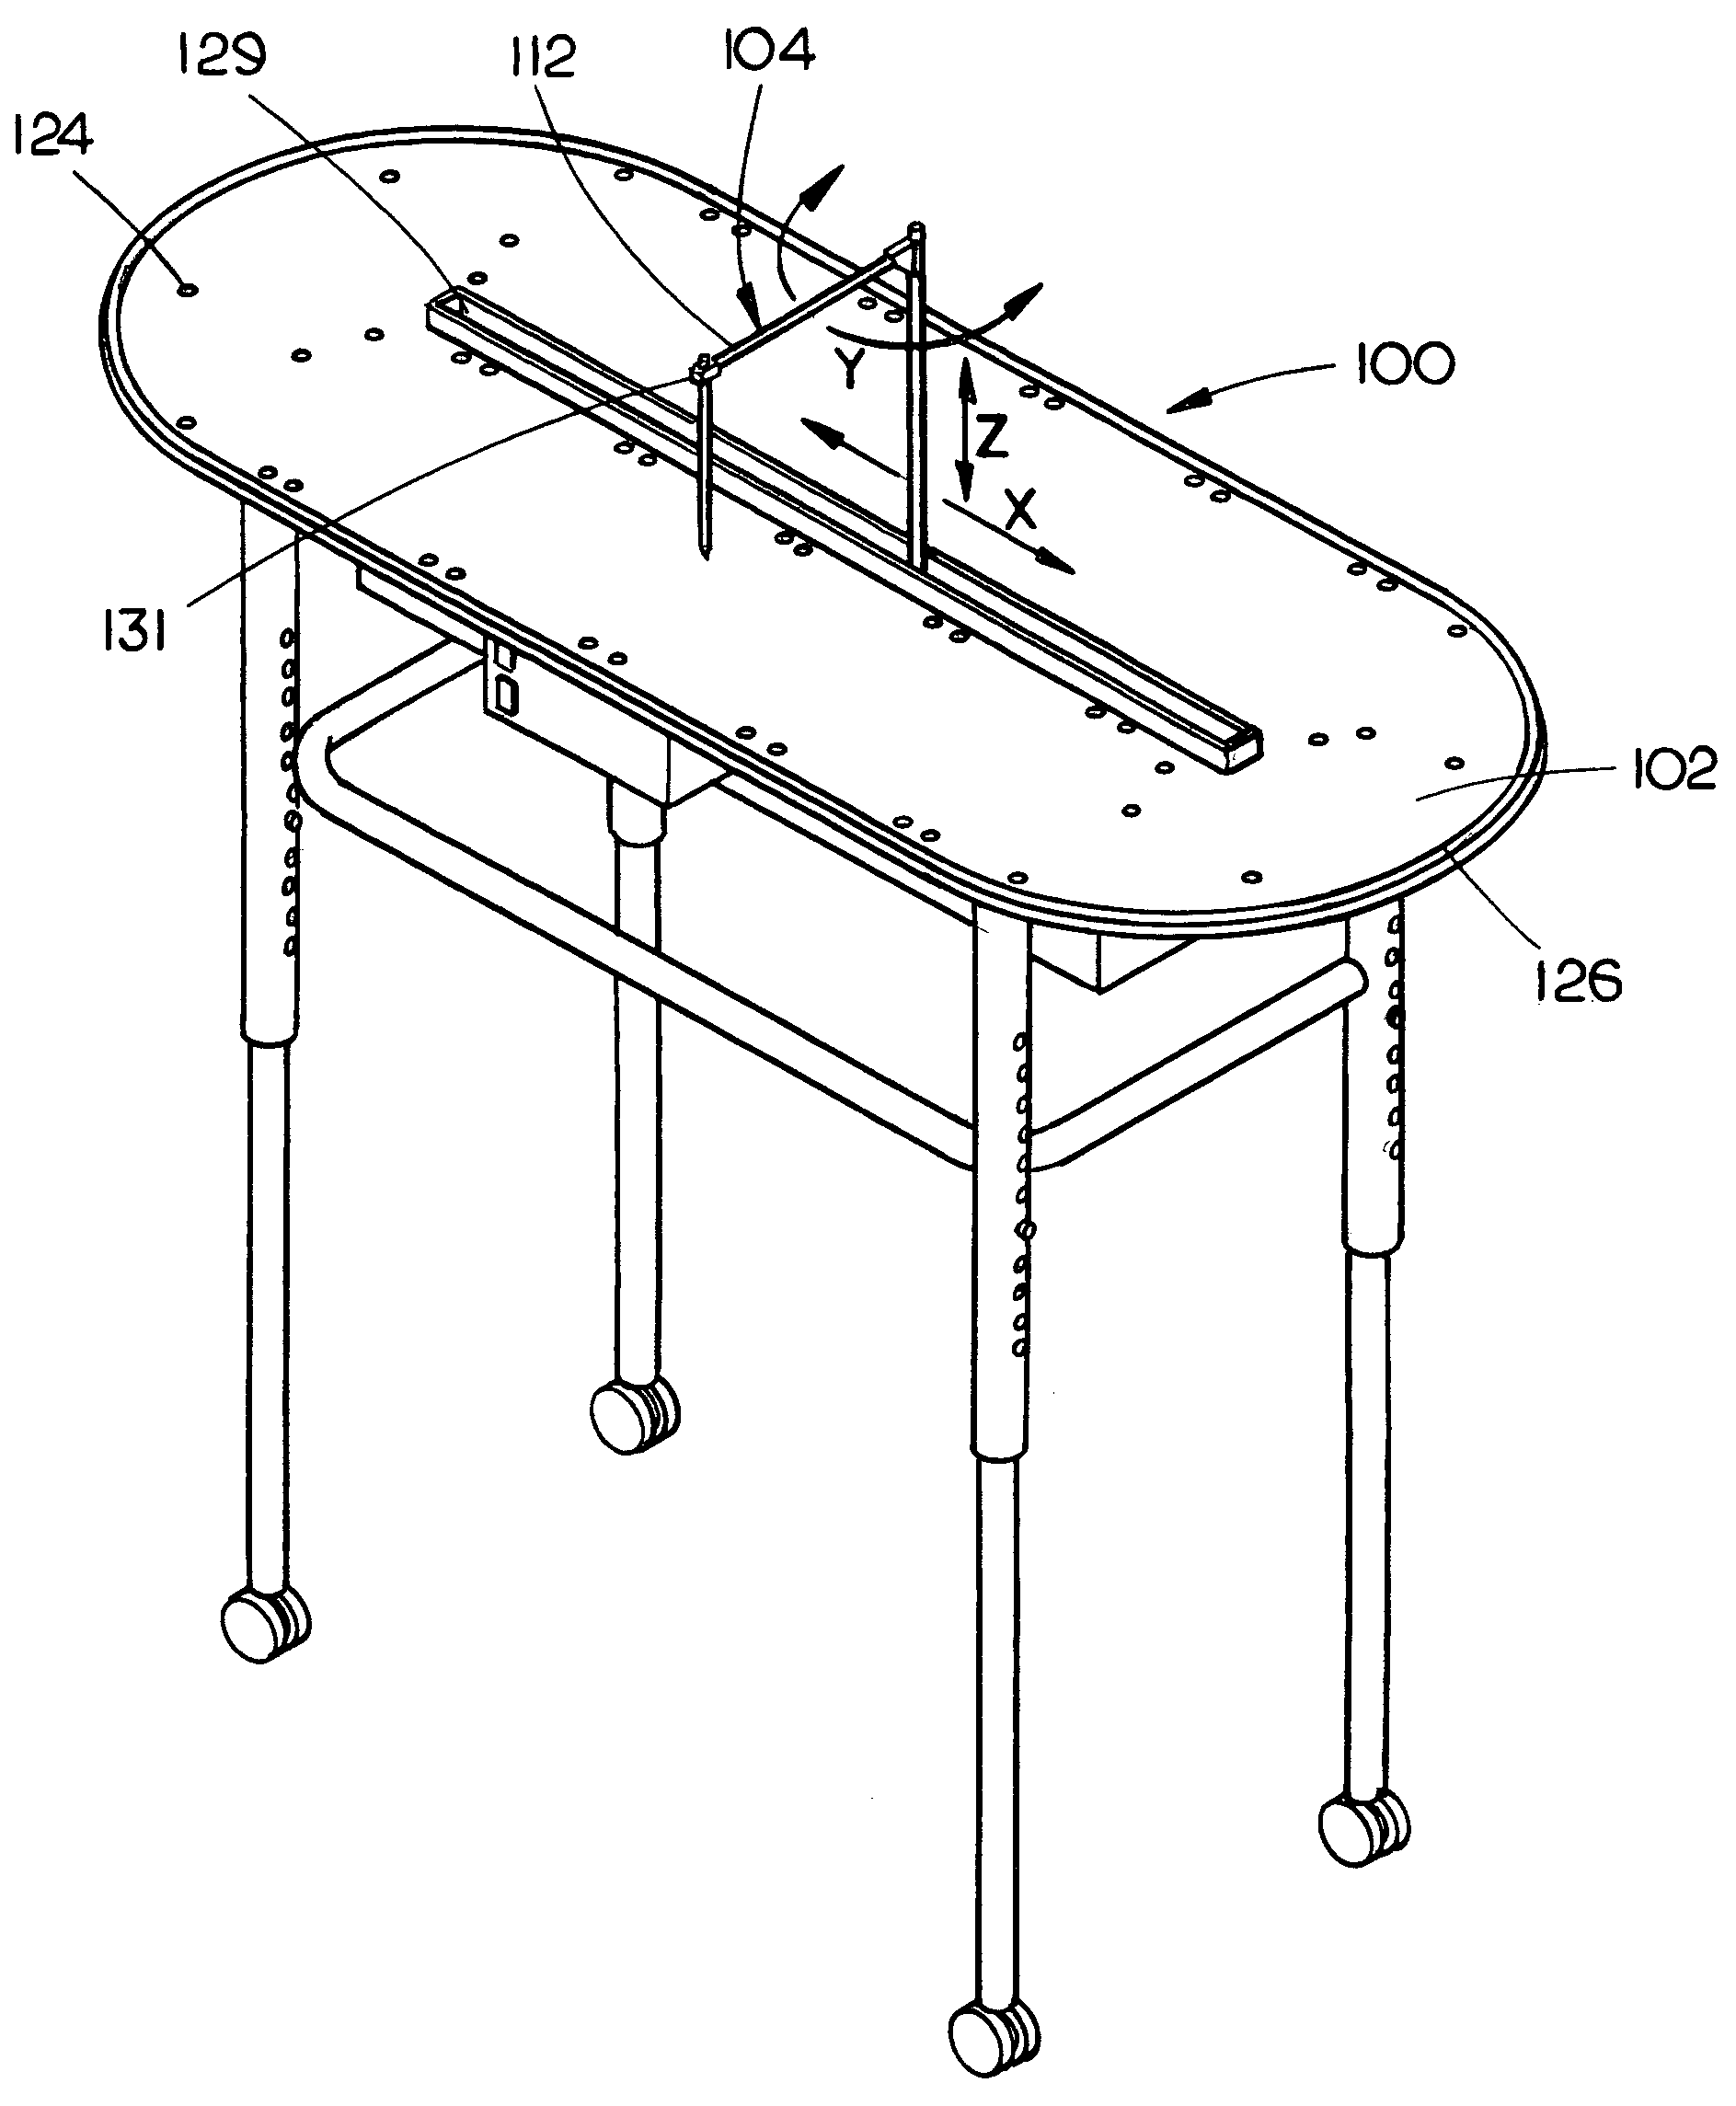 Automated sampling device